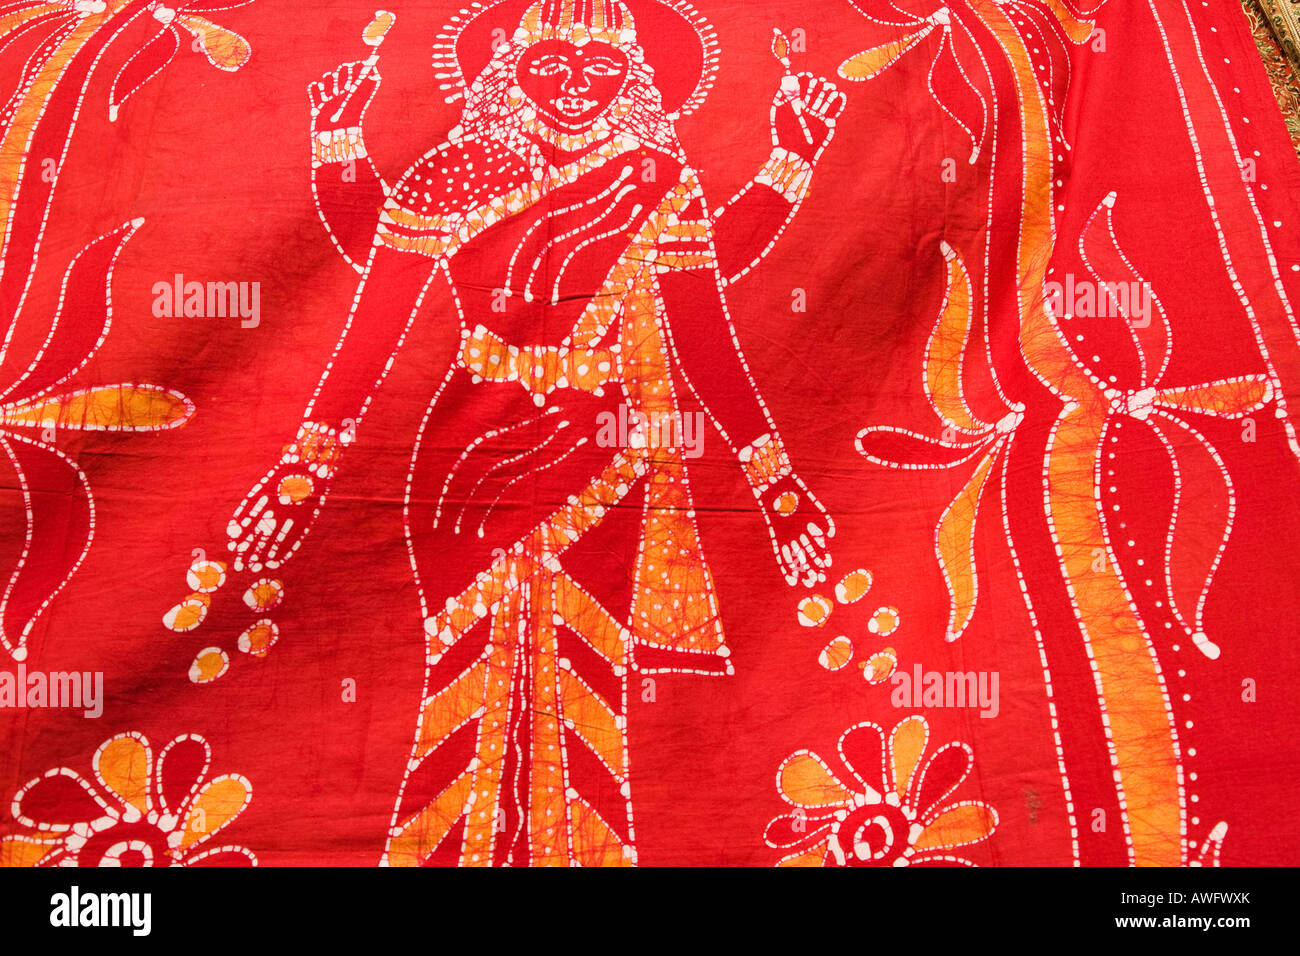 CALIFORNIA Santa Barbara Colorful pattern and design on red Indian fabric woman and trees Stock Photo